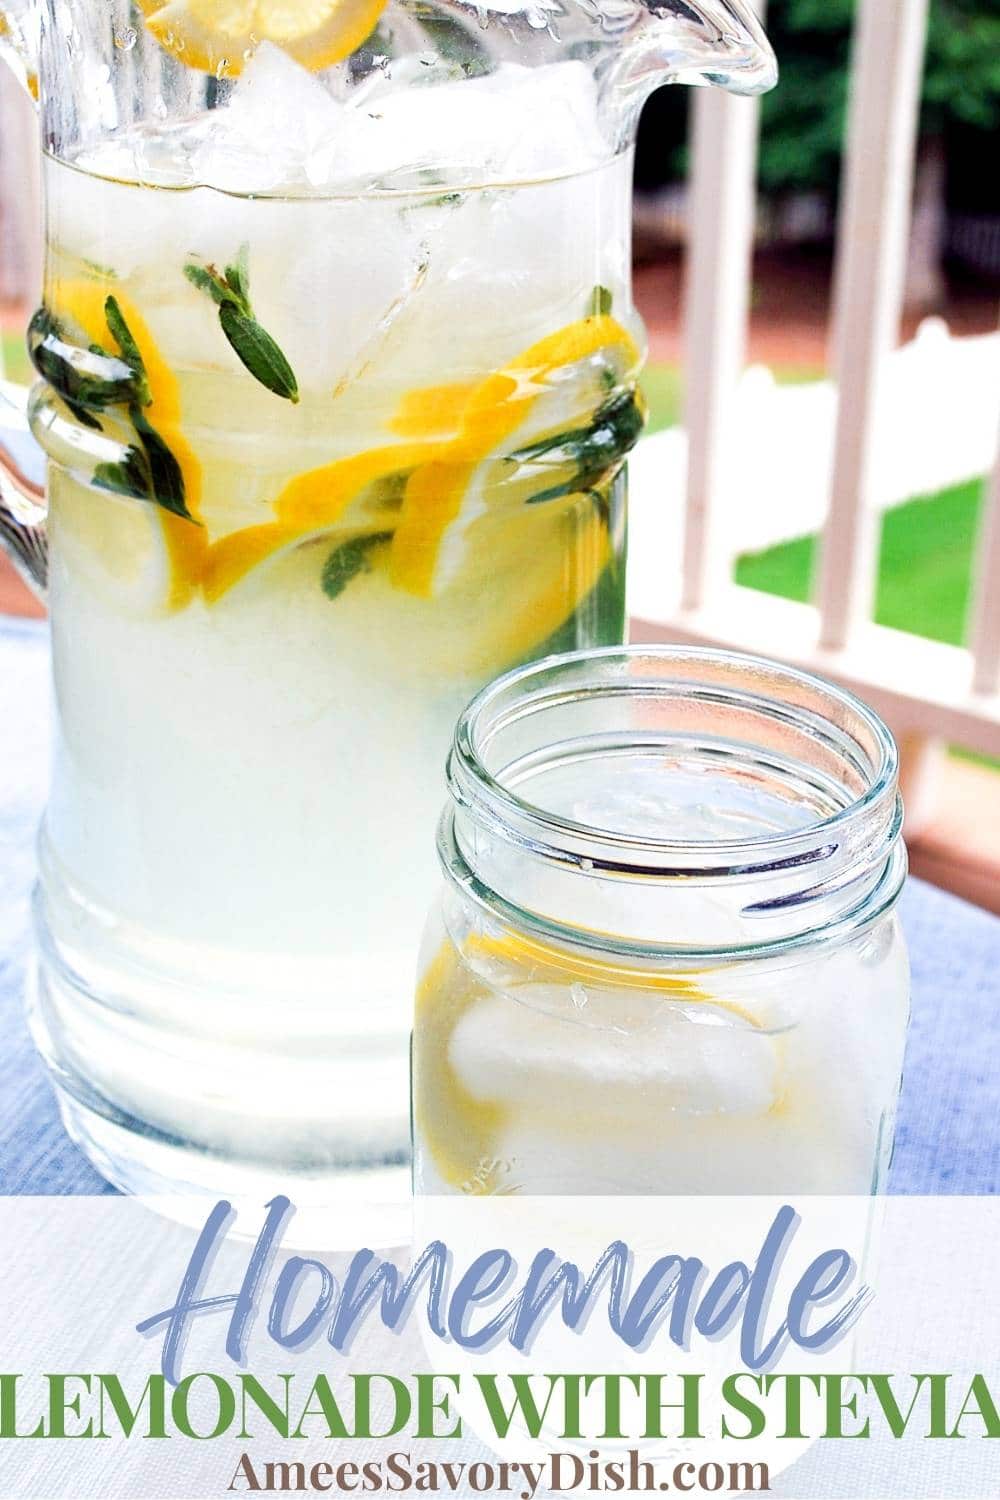 A refreshing summertime recipe for sugar-free lemonade made with all-natural stevia and freshly squeezed lemons. via @Ameessavorydish